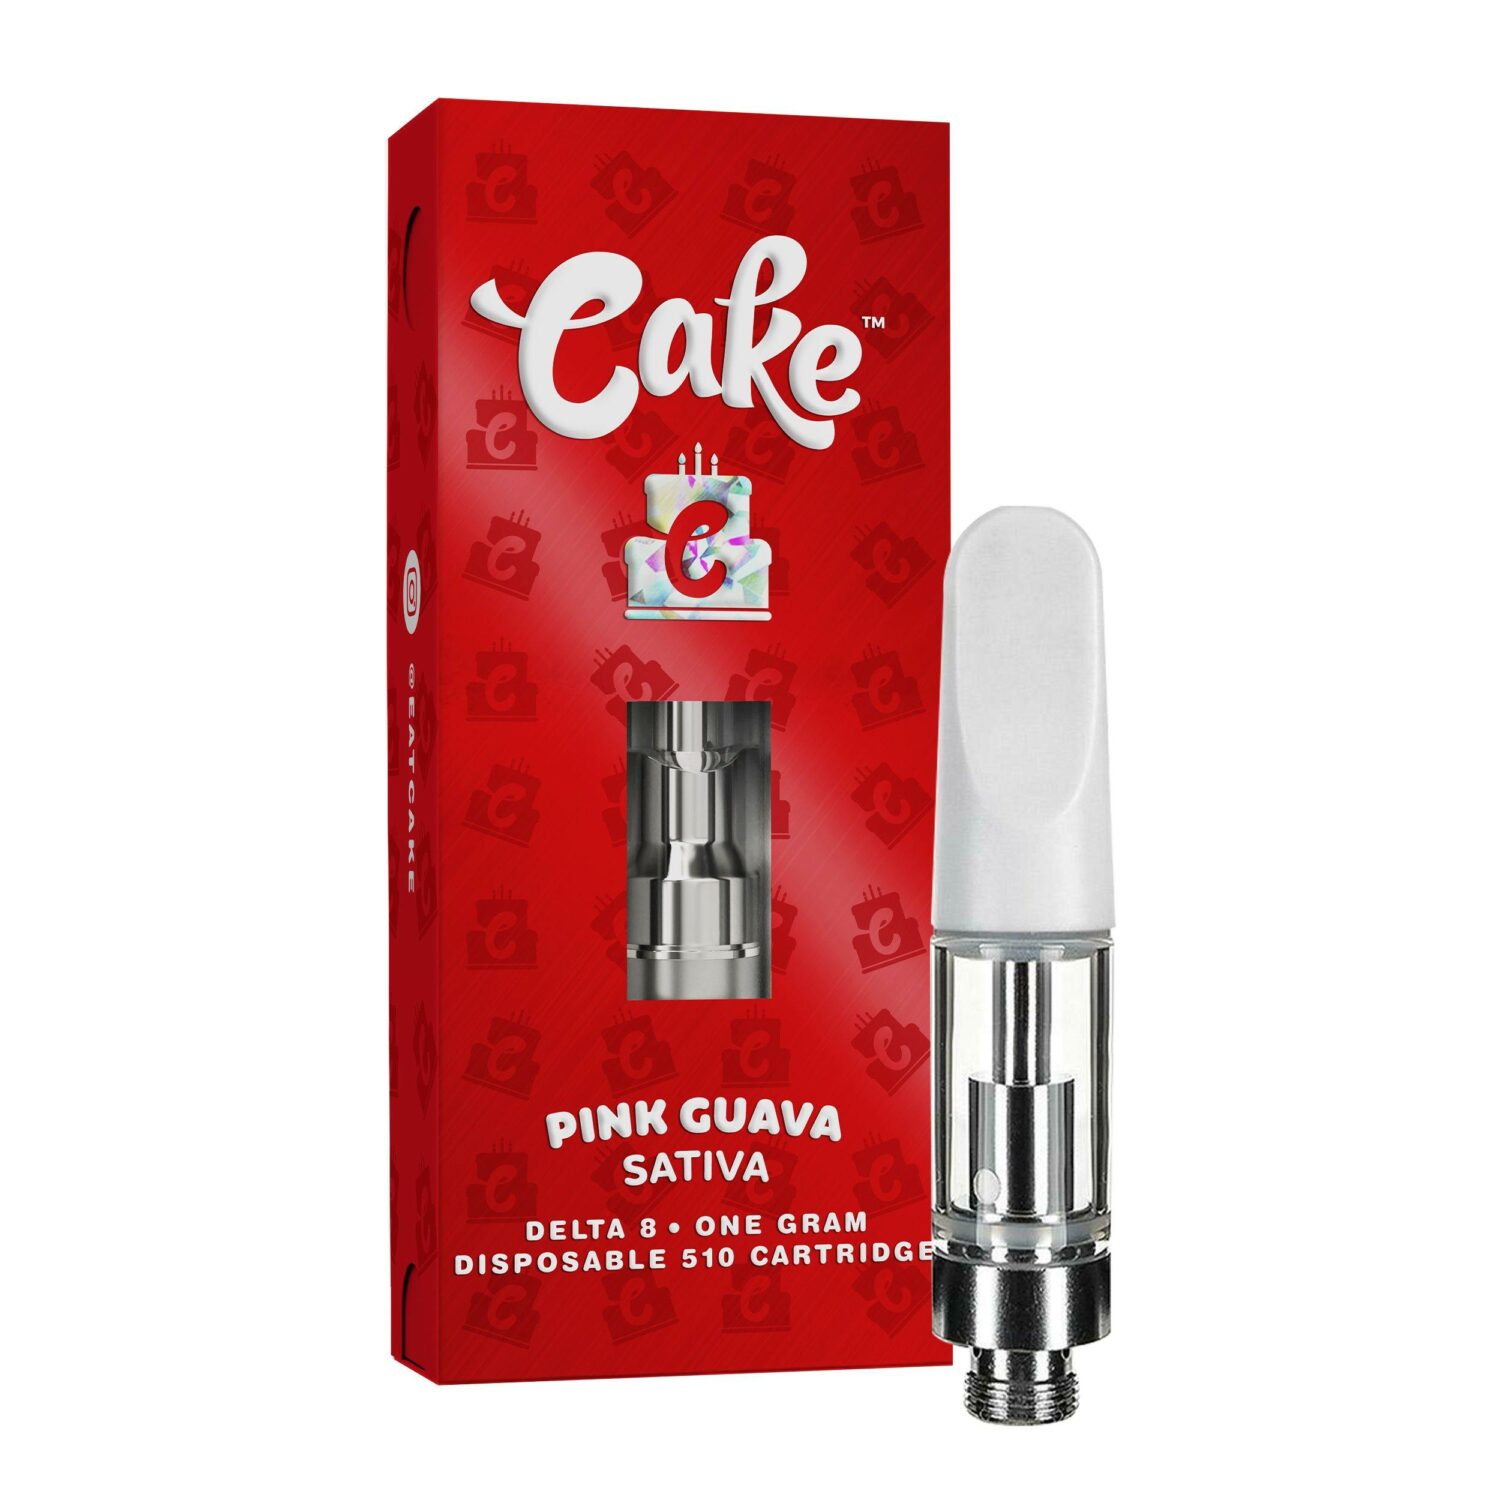 d8gas-cake-delta-8-cartridges-pink-guava-scaled-1.jpg